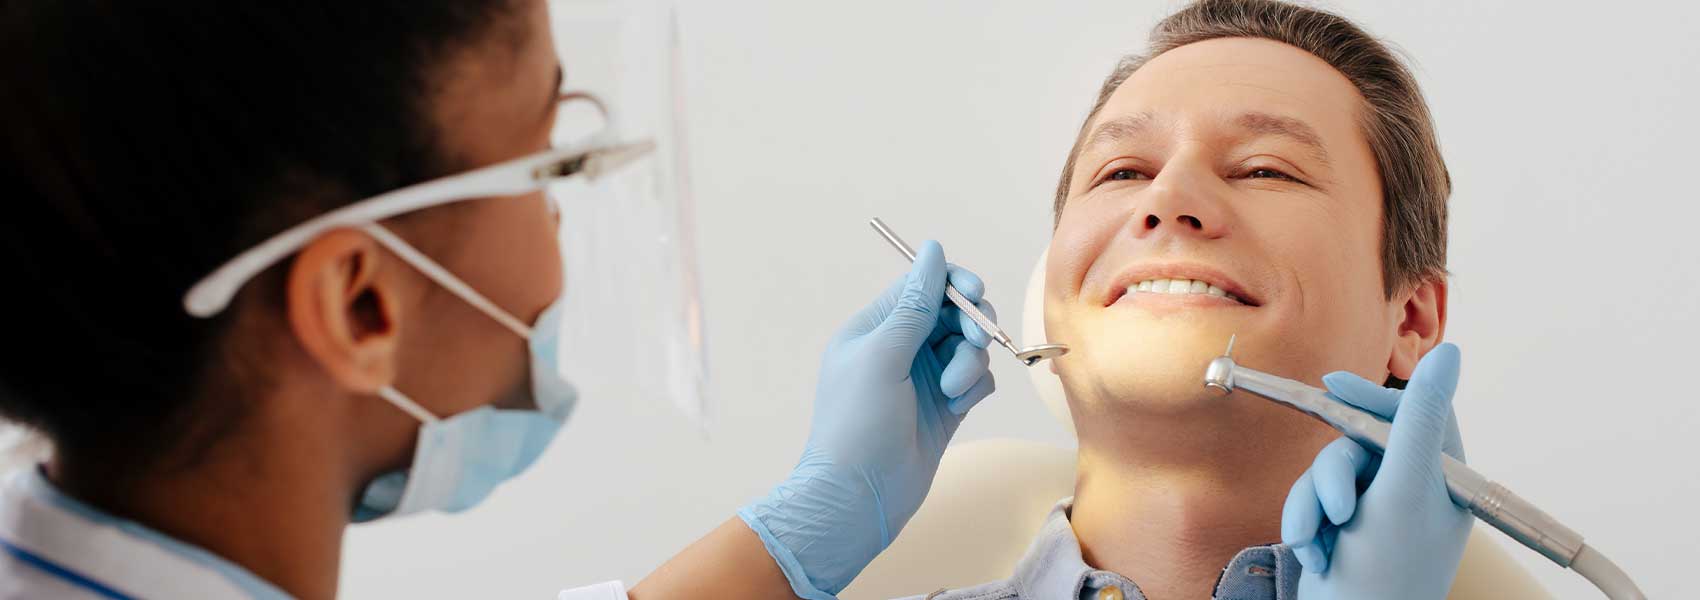 A dentist prepares to treat her patient